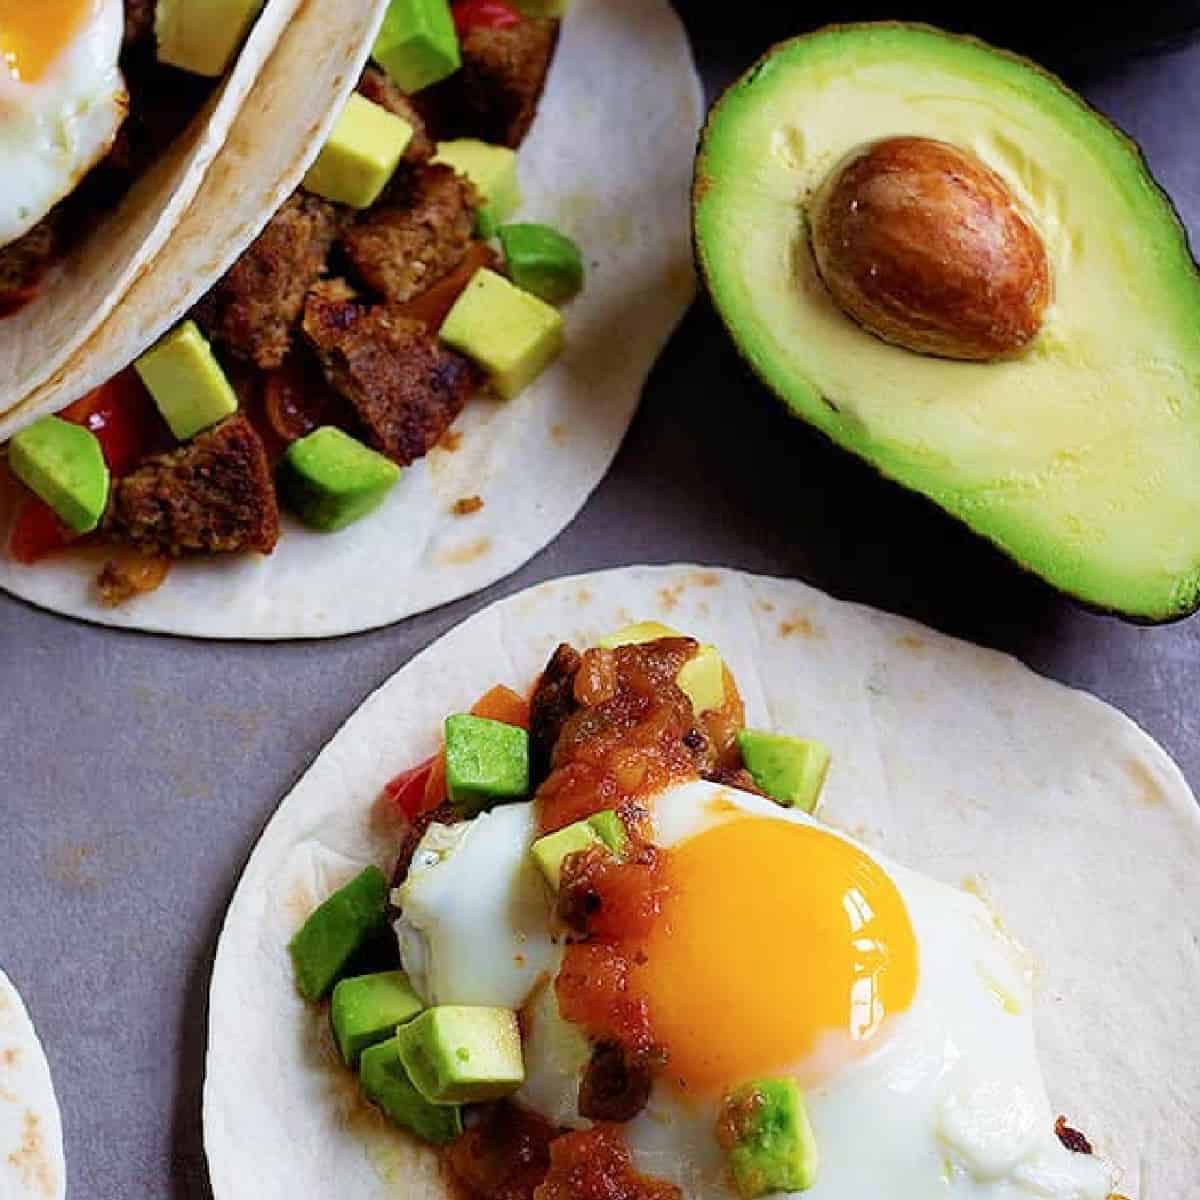 This Breakfast Tacos Recipe is easy, simple and quick to make. It's full of veggies and so delicious that no one could resist! 
